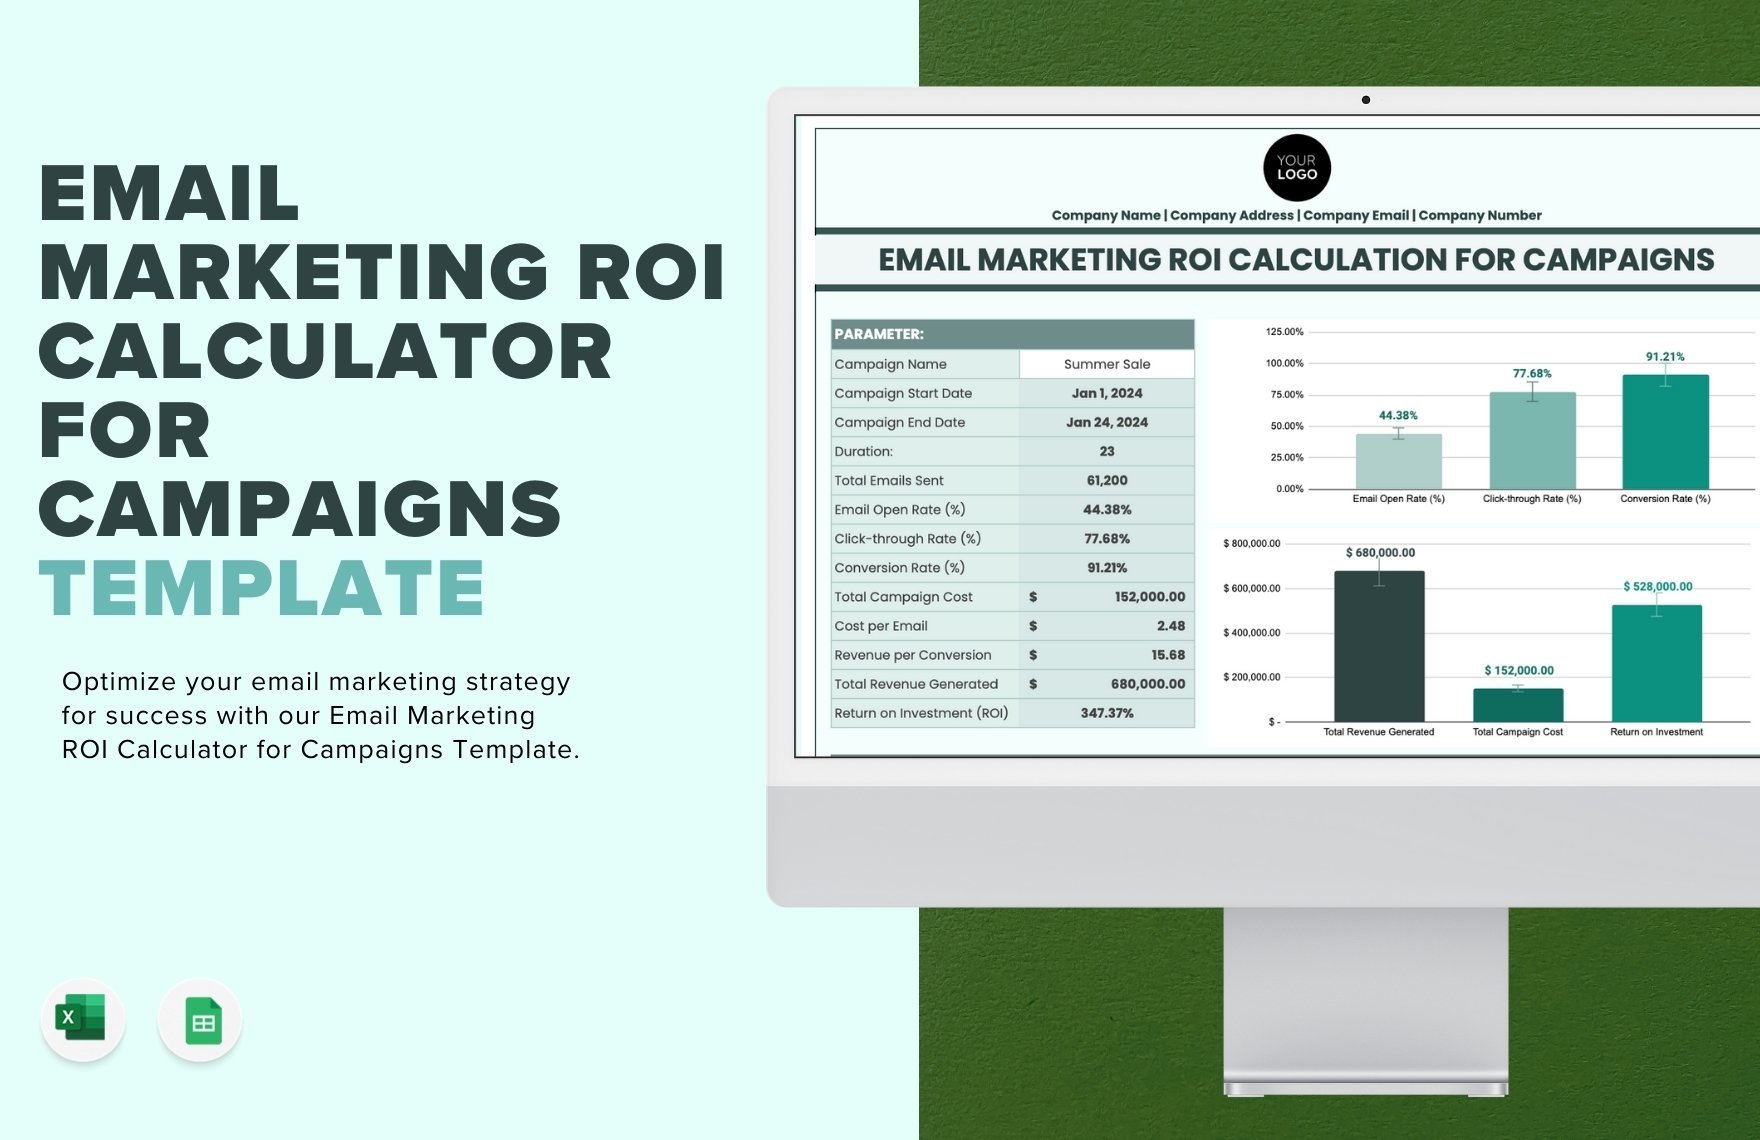 Email Marketing ROI Calculator for Campaigns Template